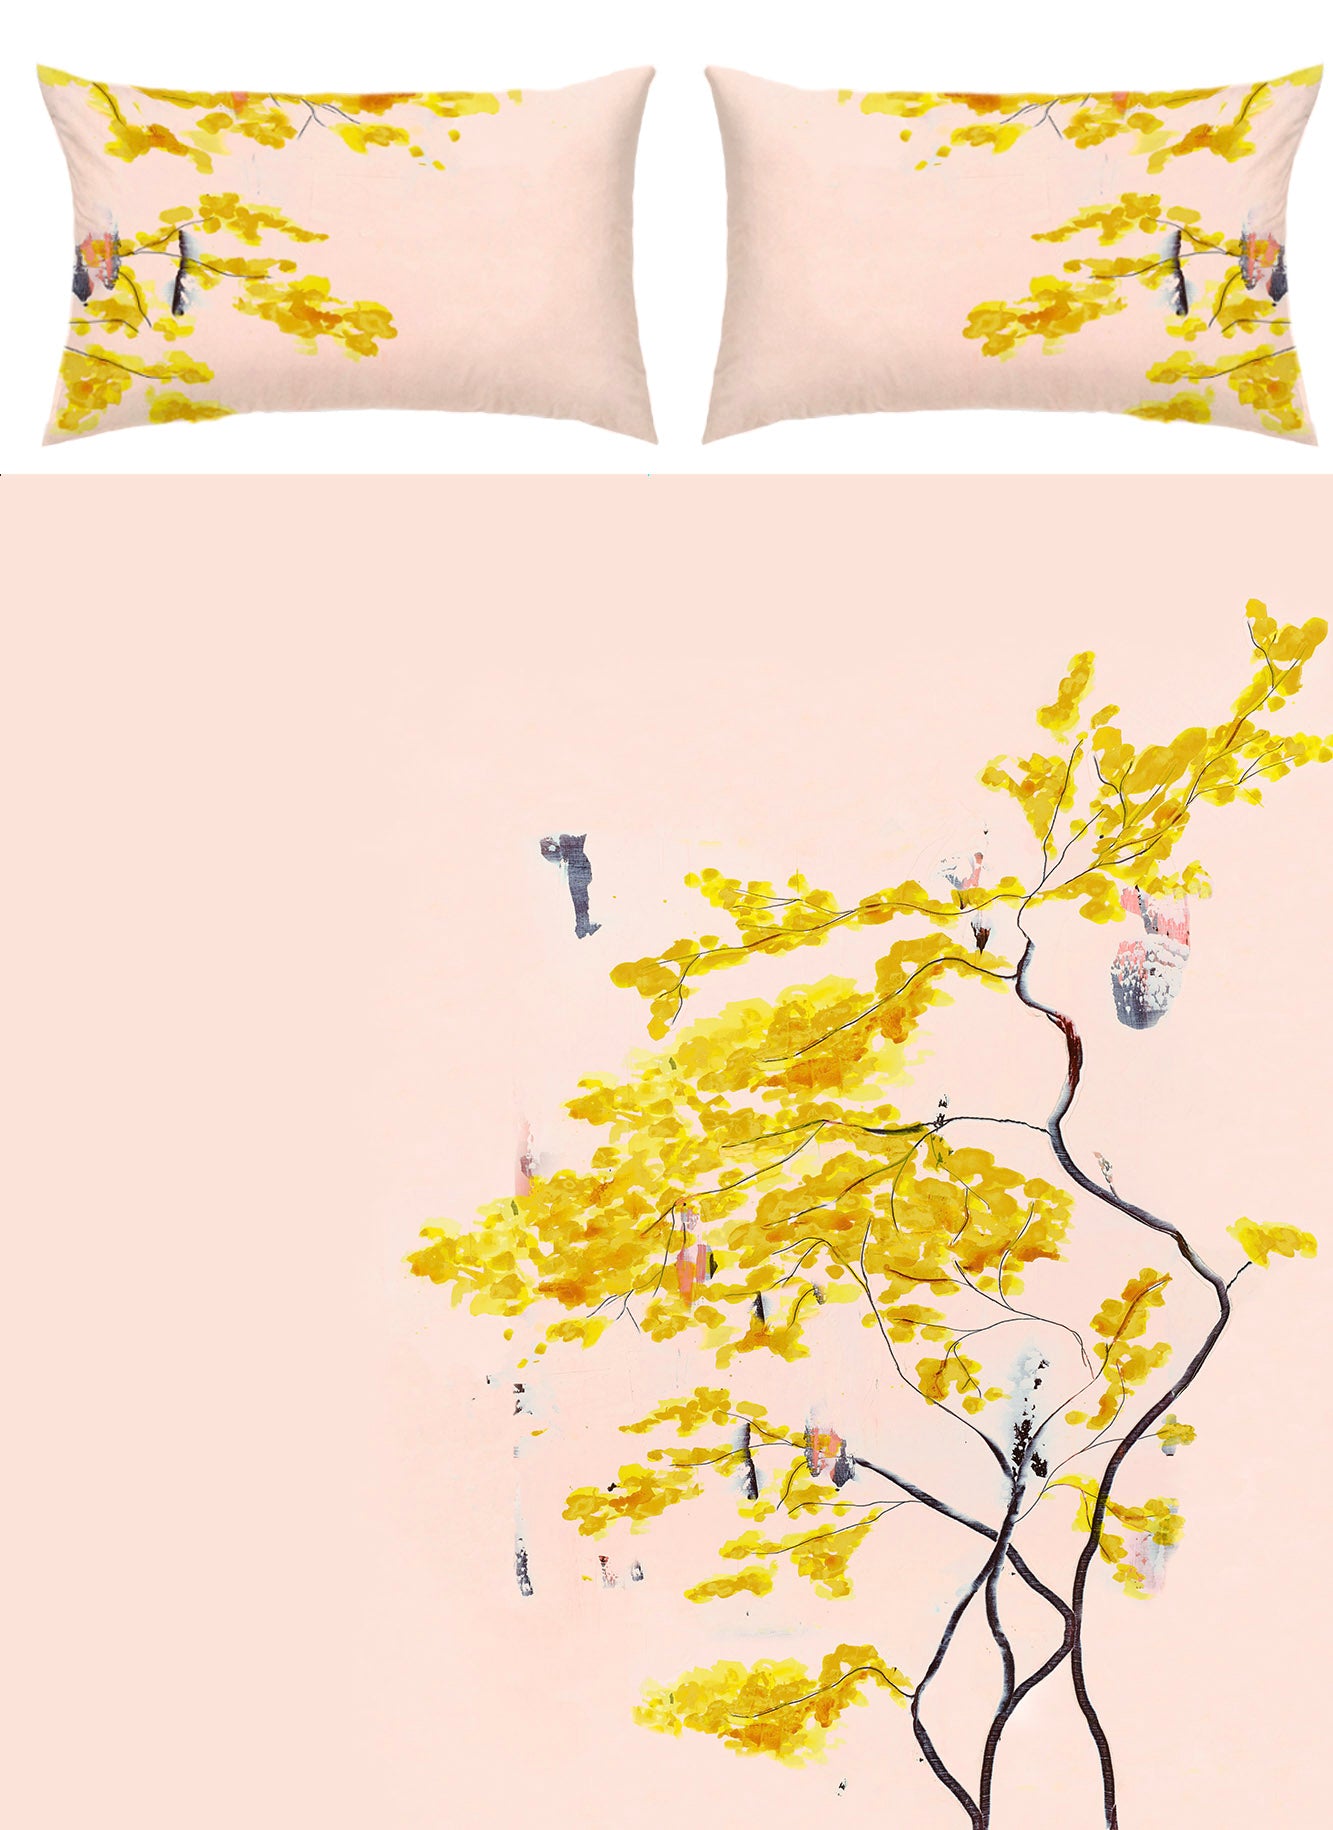 Anna Jacobs Chinese Tree in Blush bed linen in a lifestyle setting with Afternoon Dreaming print on the wall, Beak Street in Rose cushion and Rose Hummer lamp on Rose flex